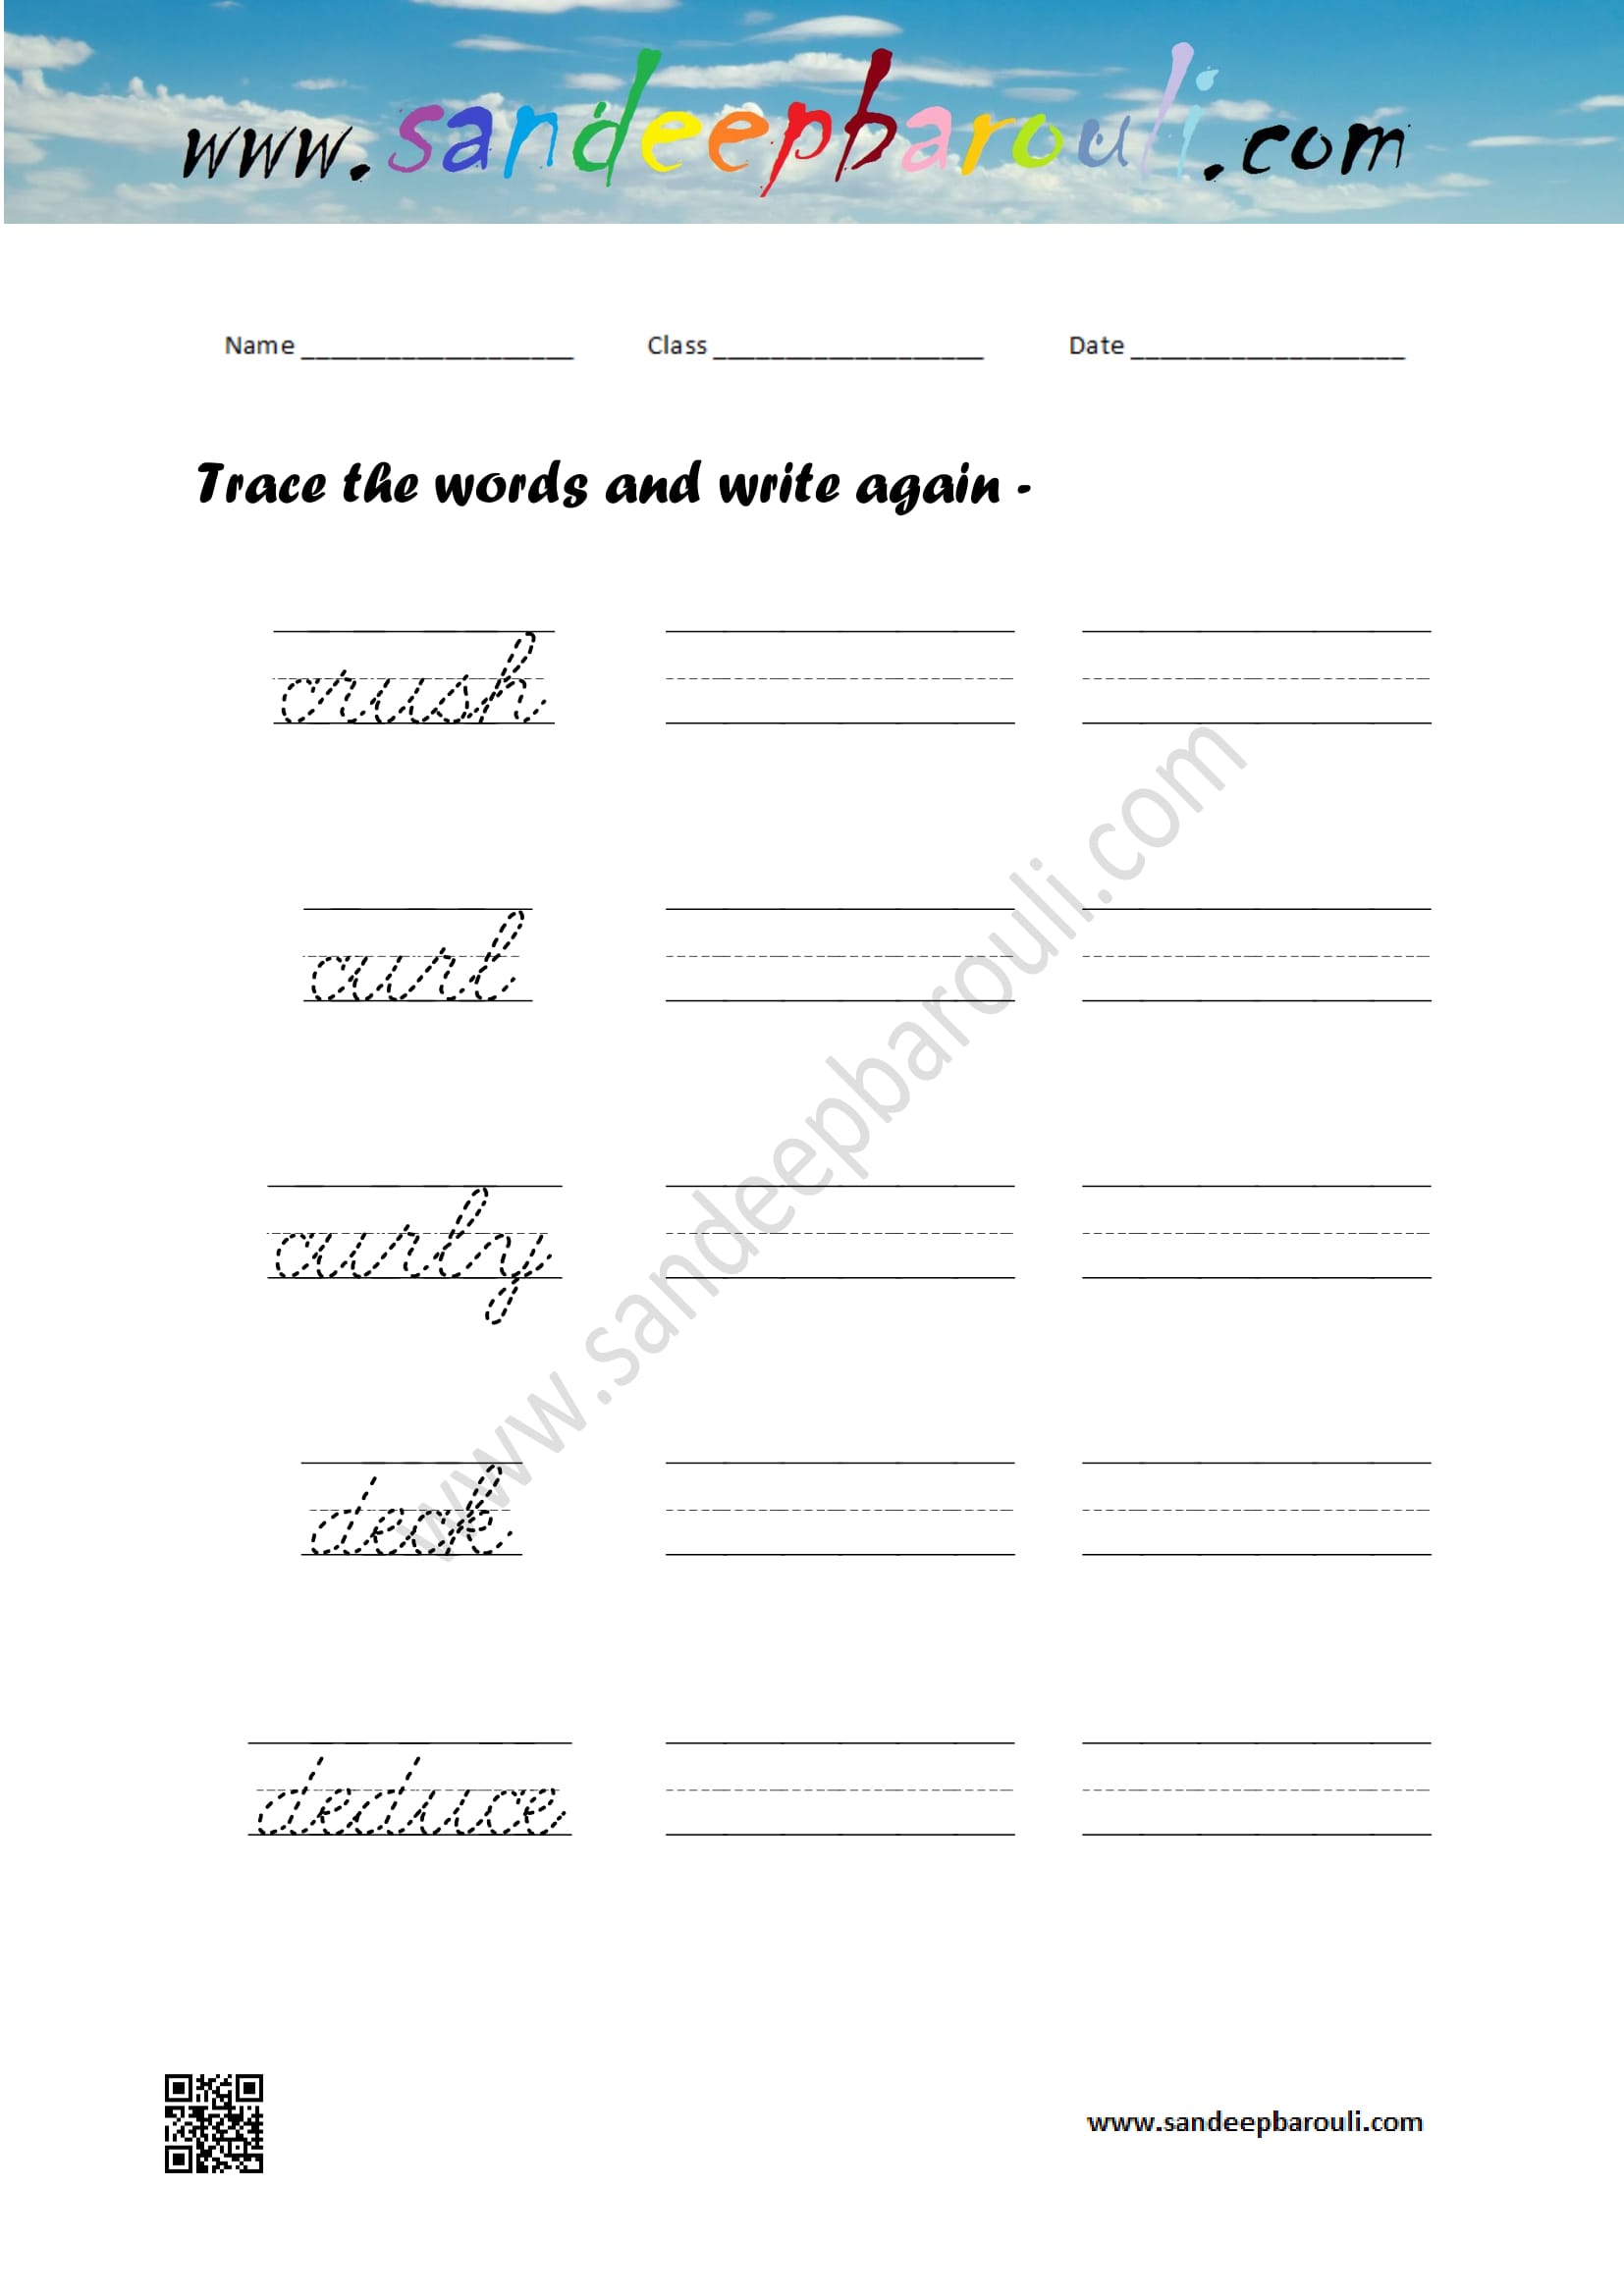 Cursive writing worksheet – trace the words and write again (93)